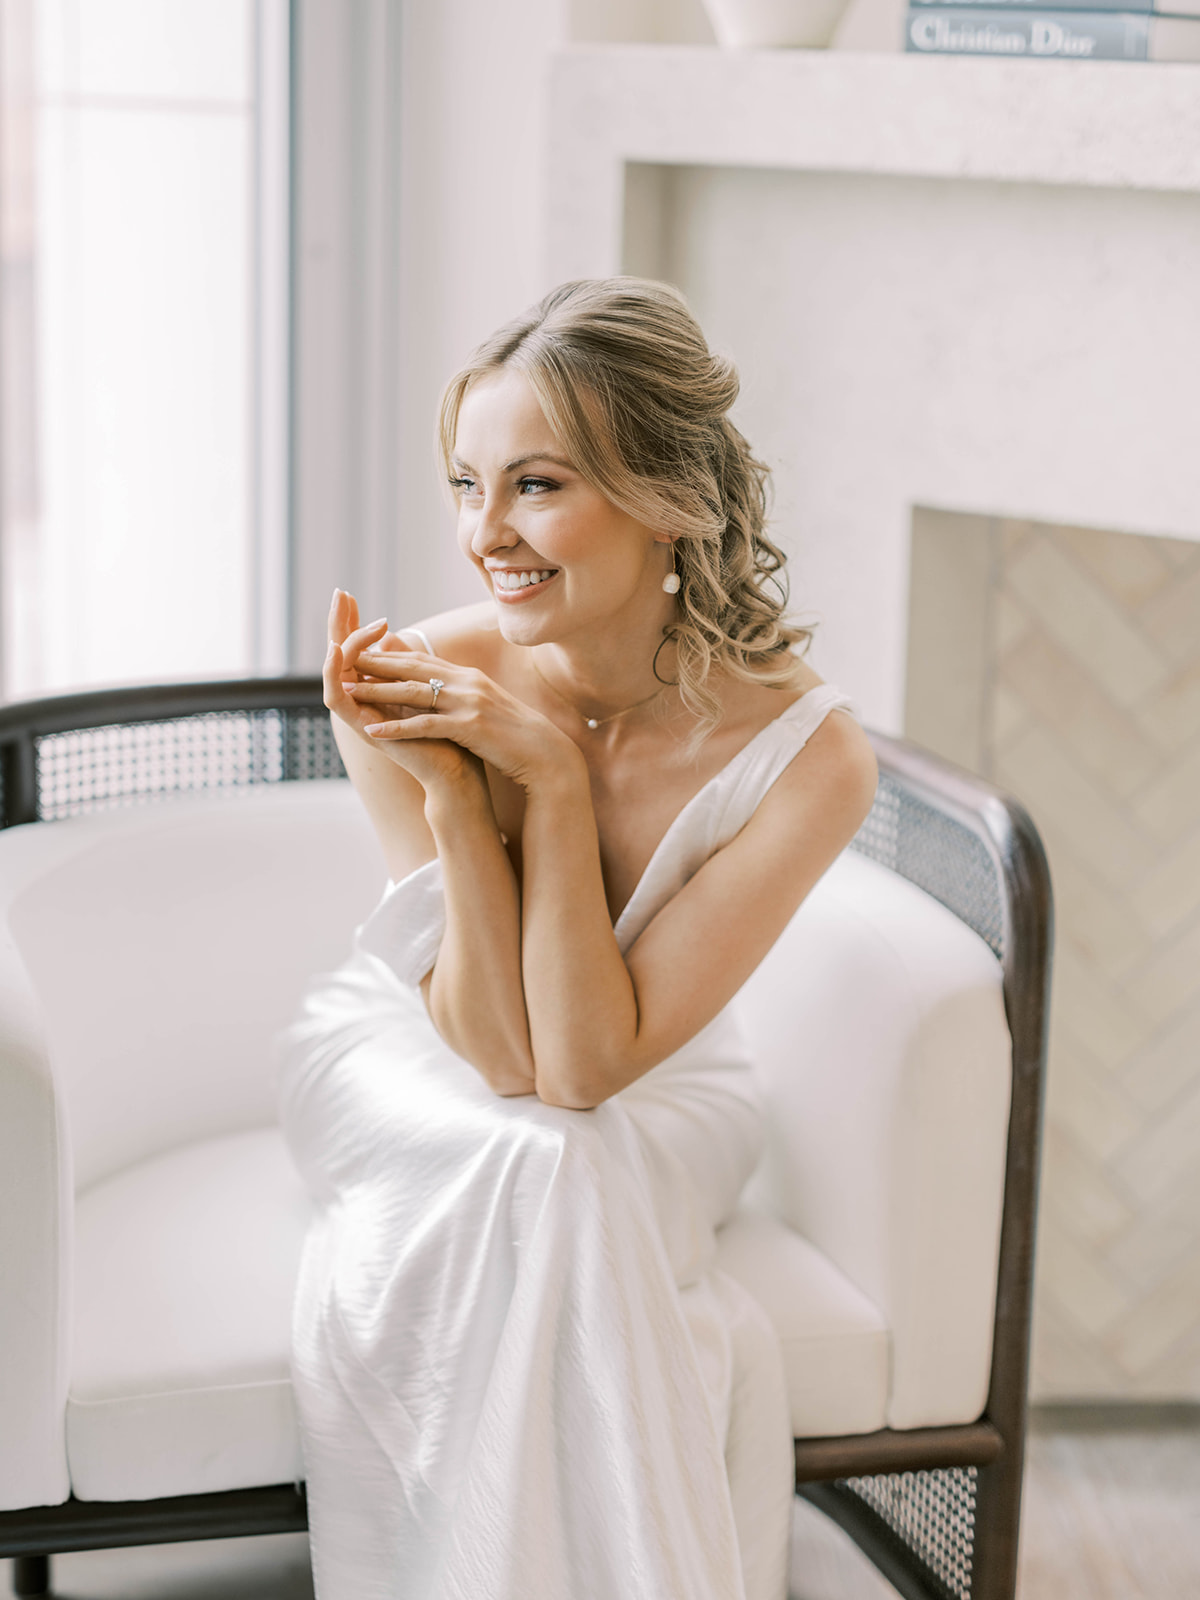 How to find the perfect wedding dress Calgary Wedding Photographers, blush and raven, nicole sarah, wedding dress shopping, bridal gown tips, wedding dress tips